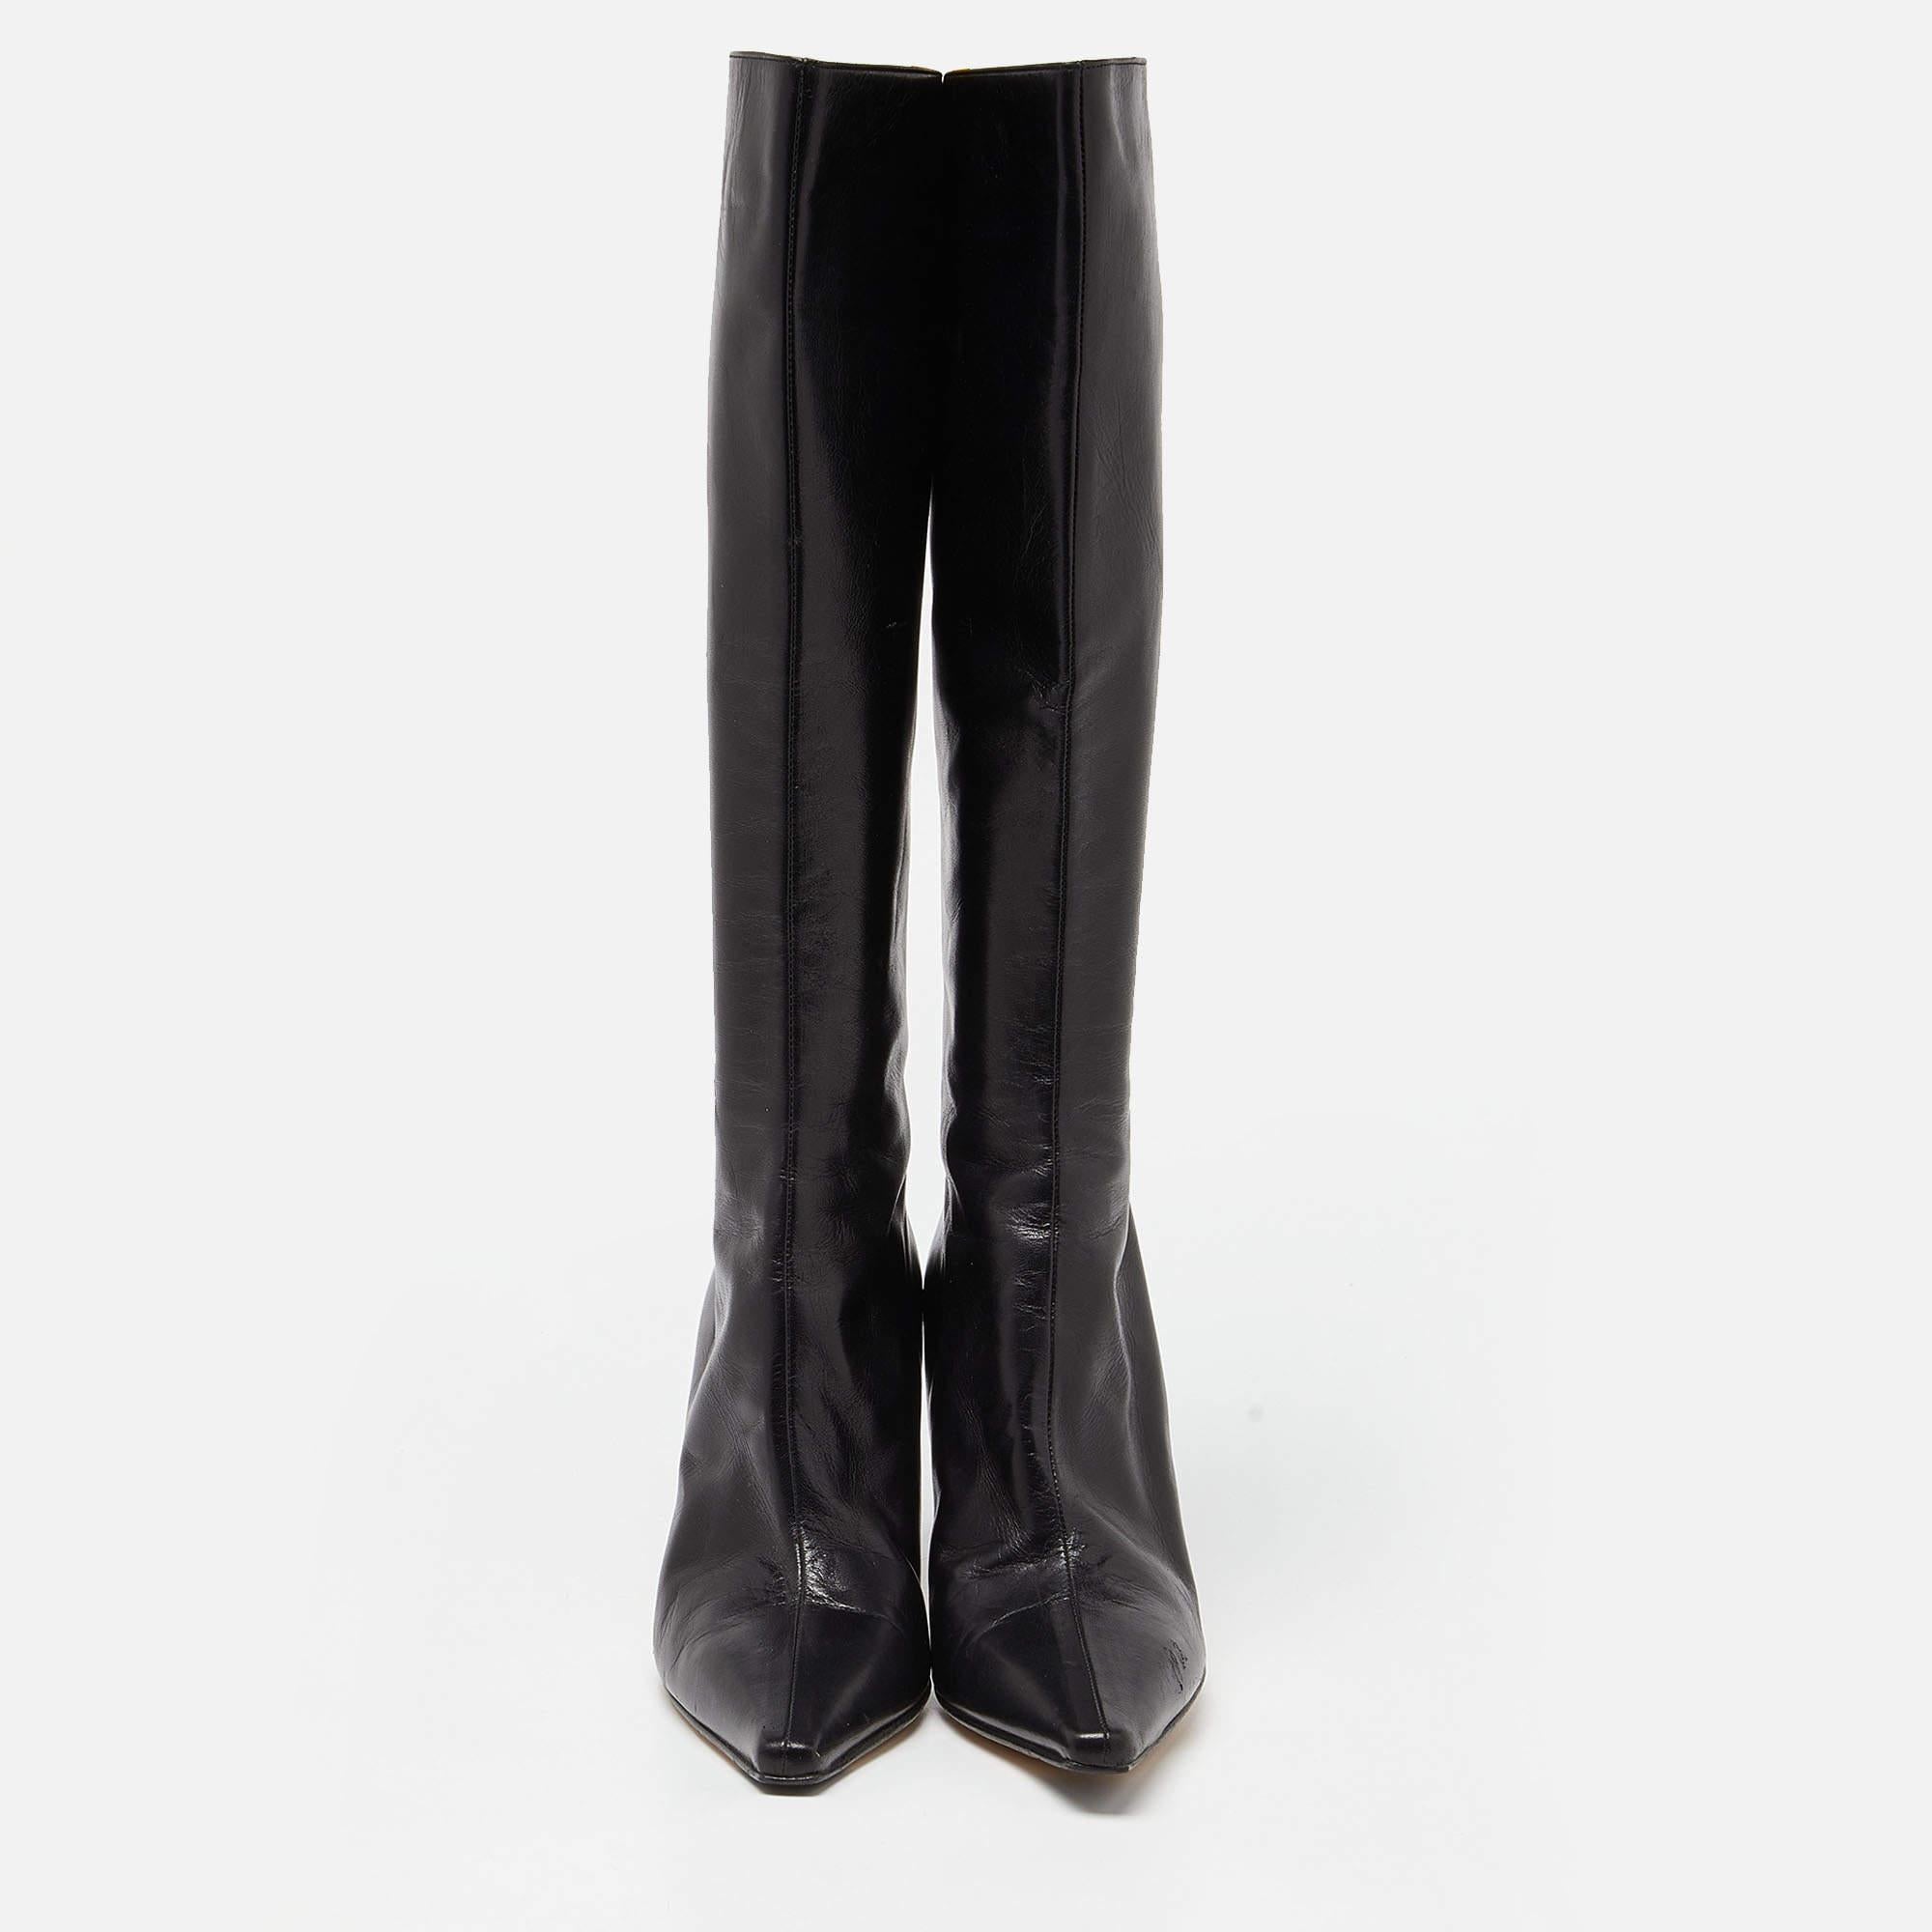 Jimmy Choo Black Leather Midcalf B0ots Size 40 For Sale 1